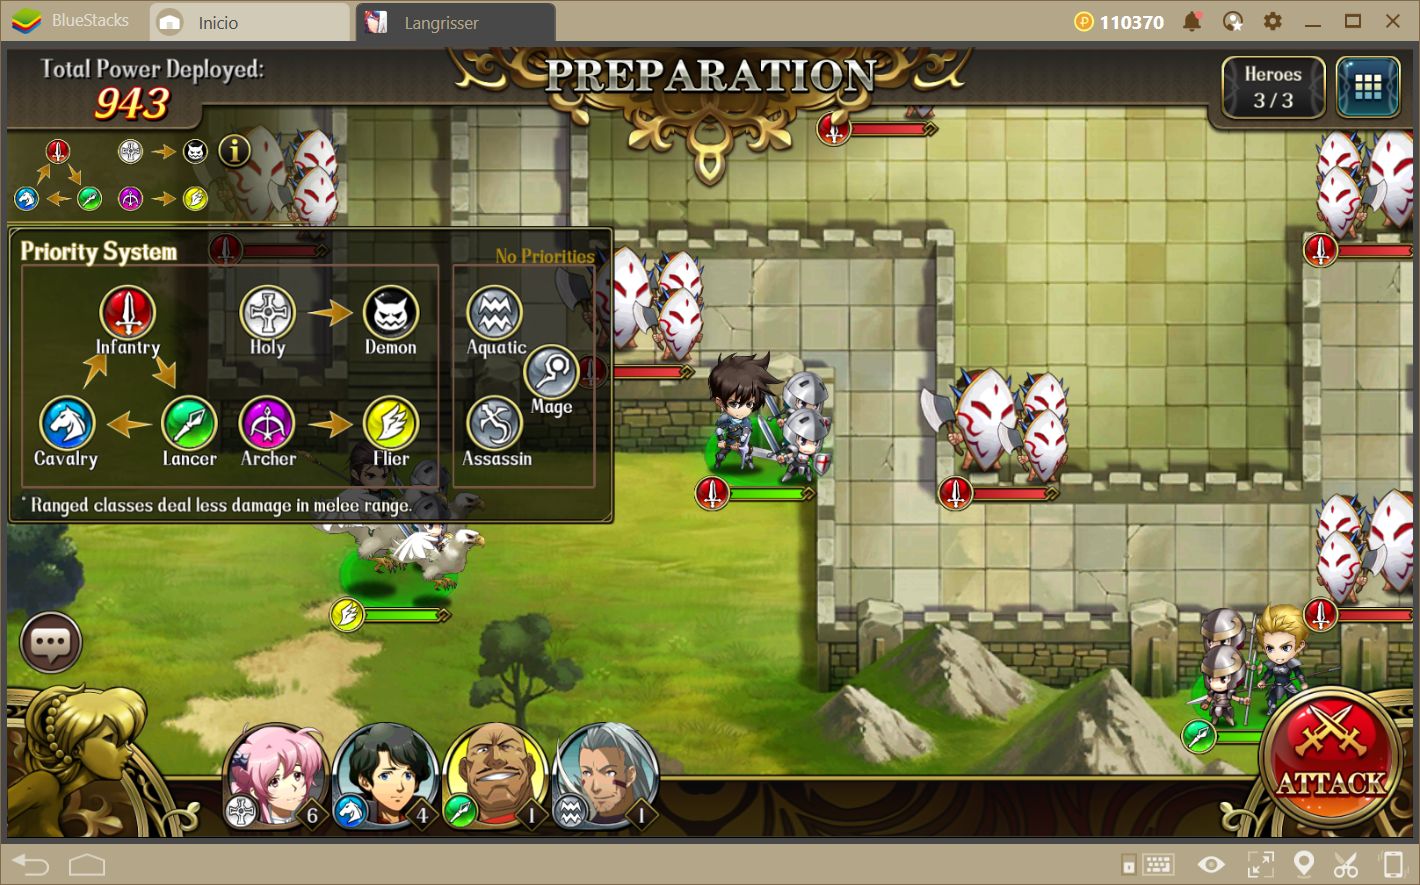 Combat Fundamentals of Langrisser: Learn all about the Priority and Terrain systems